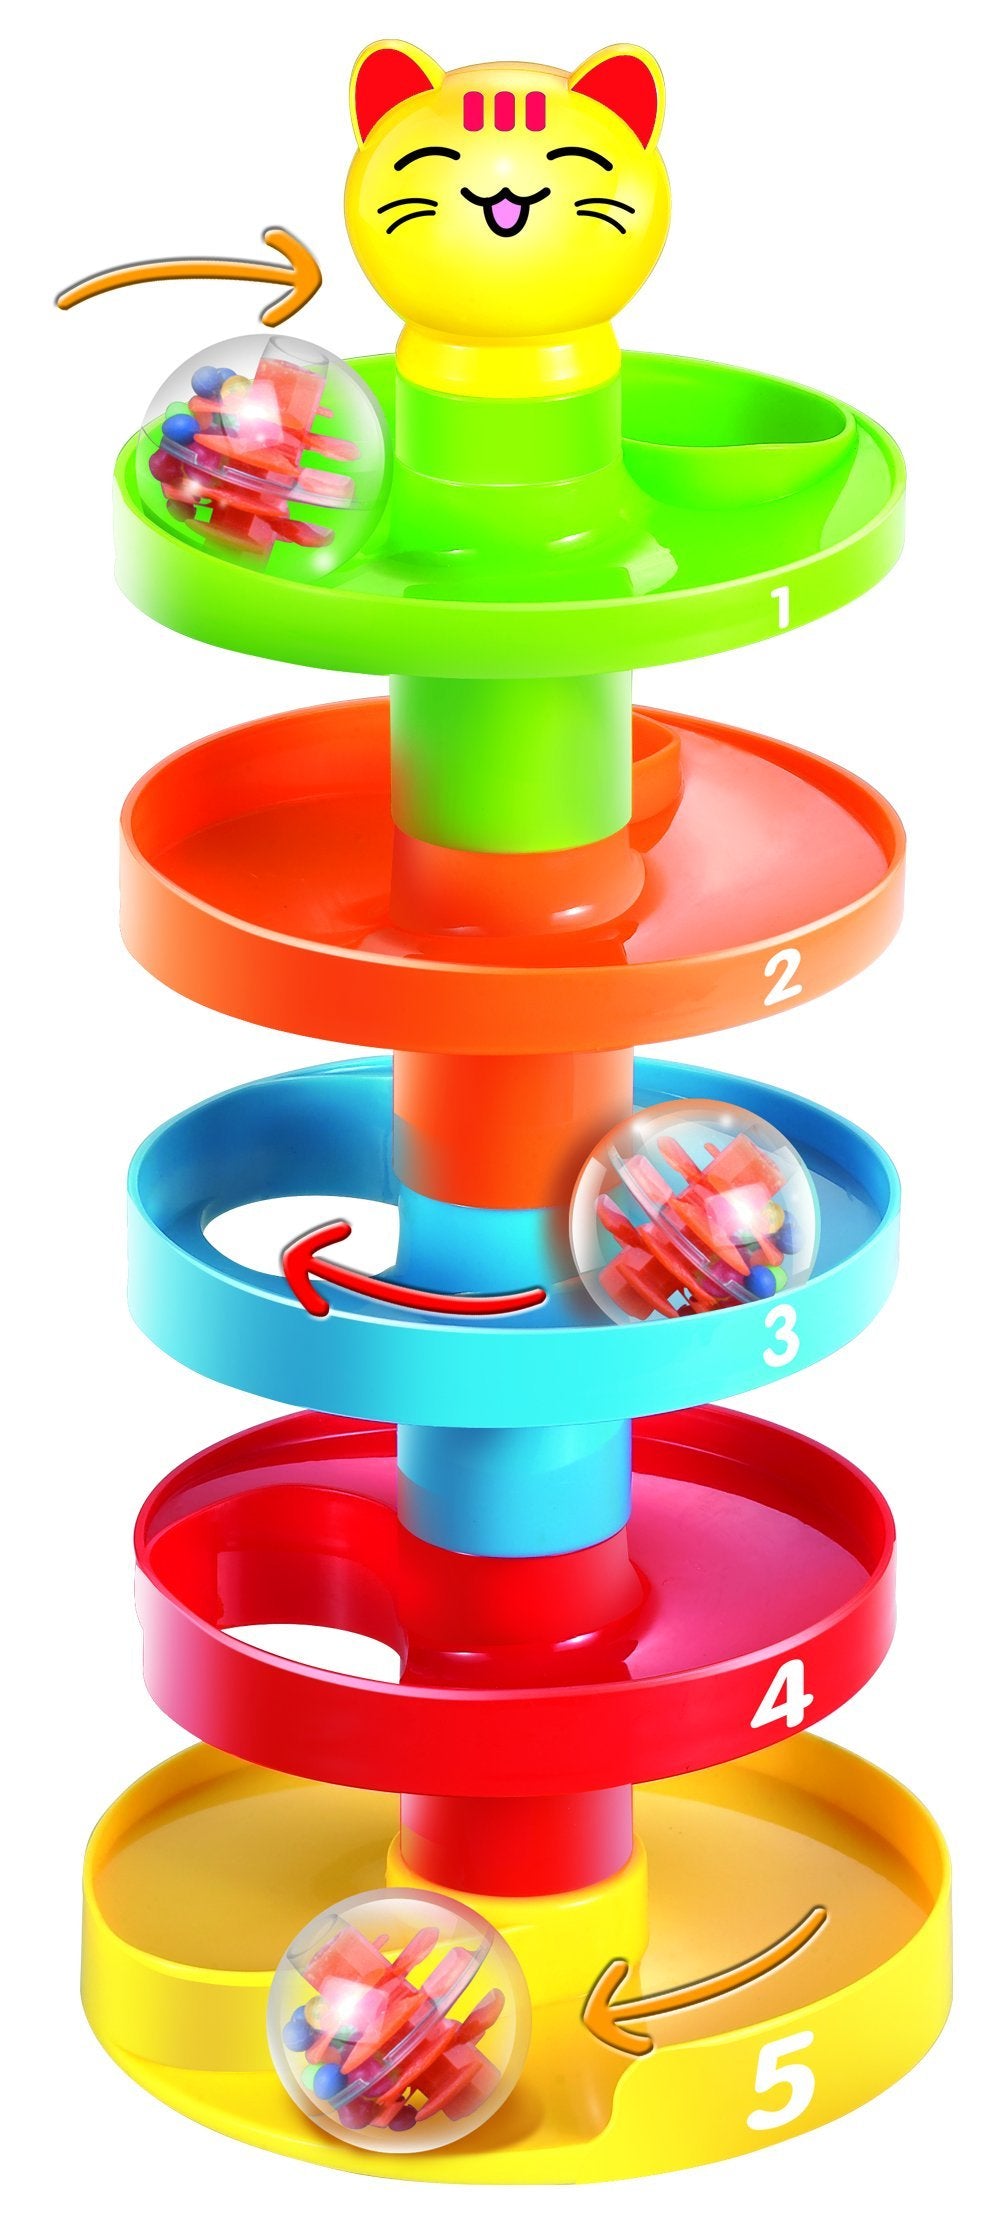 5 Layer Ball Drop Tower for Baby Development | Includes 3 Spinning Balls | Educational Toy